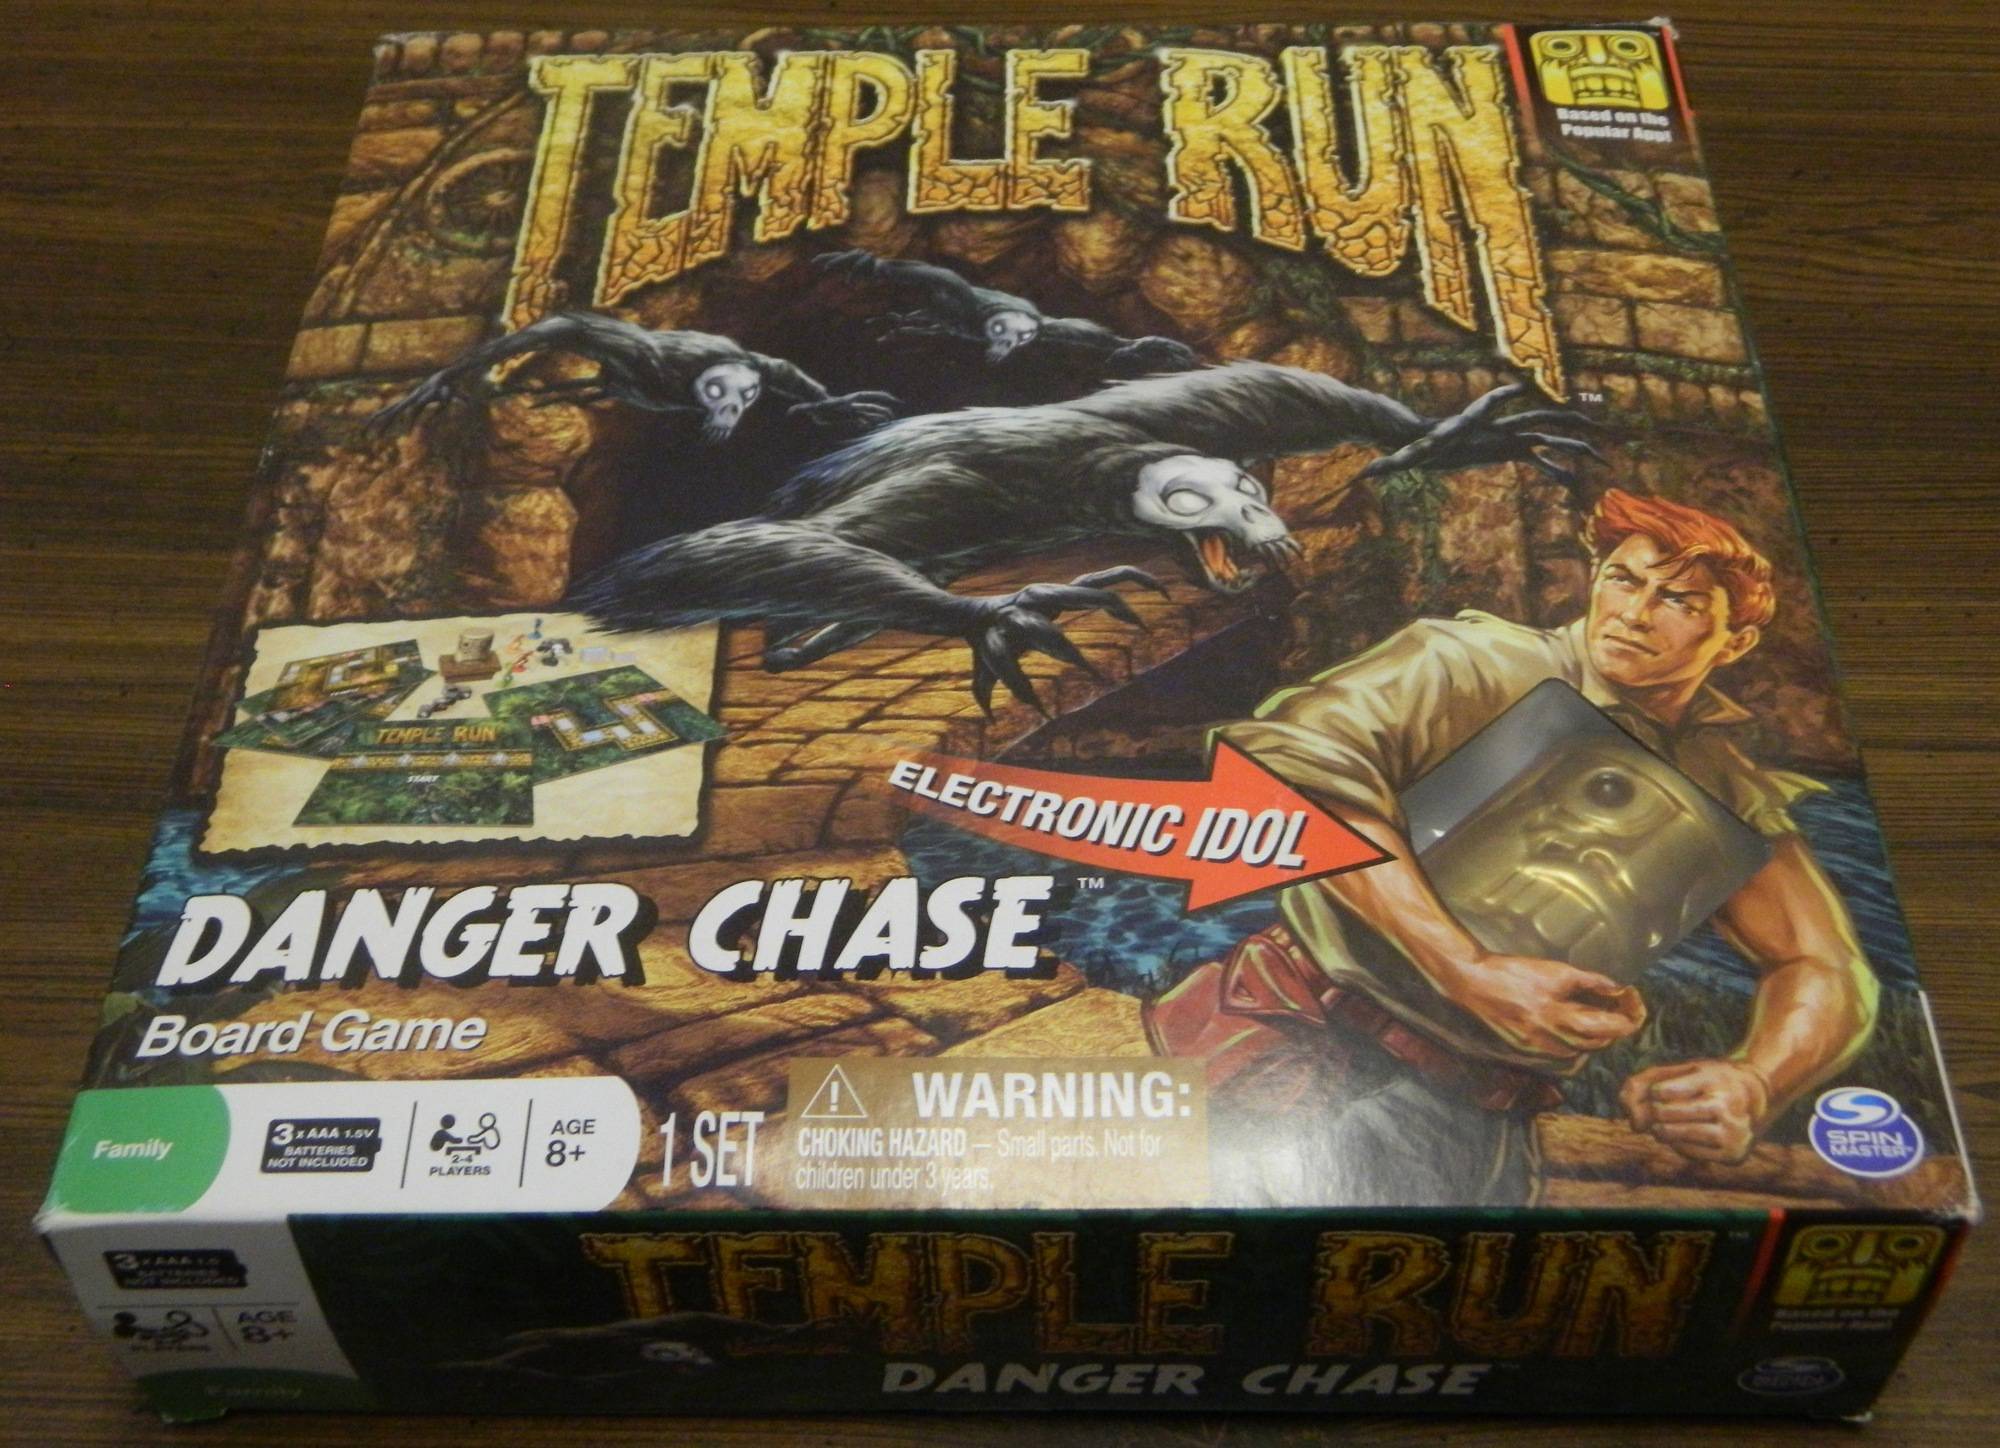 Box for Temple Run Danger Chase